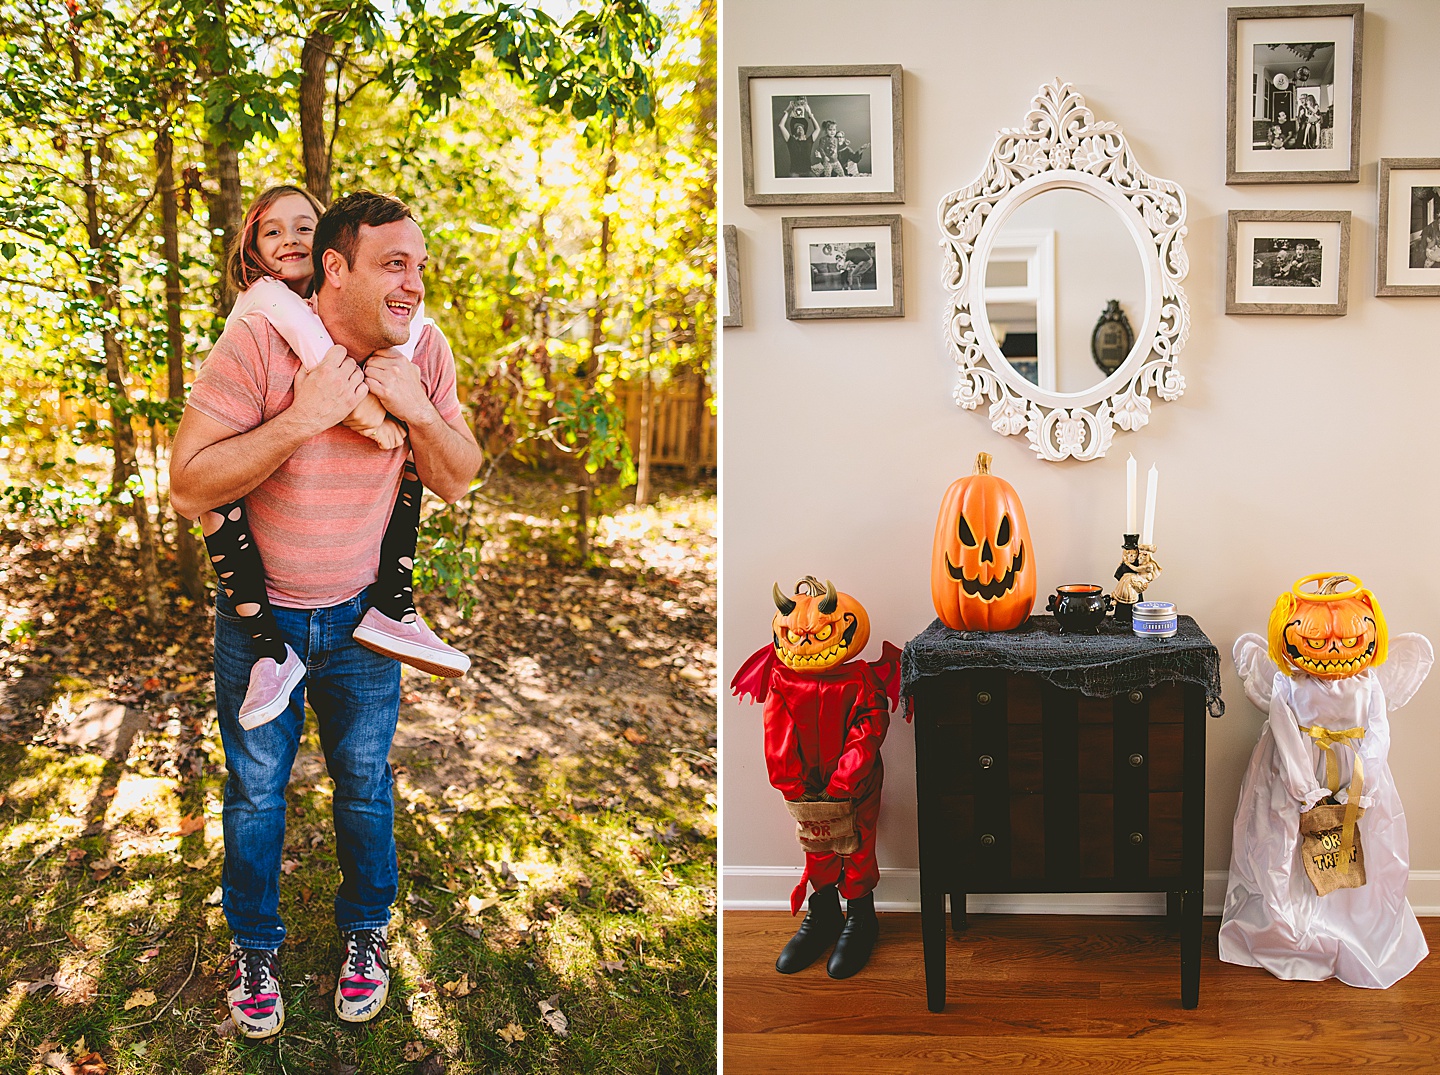 Dad giving his daughter a piggyback ride coupled with a picture of a Halloween themed entryway